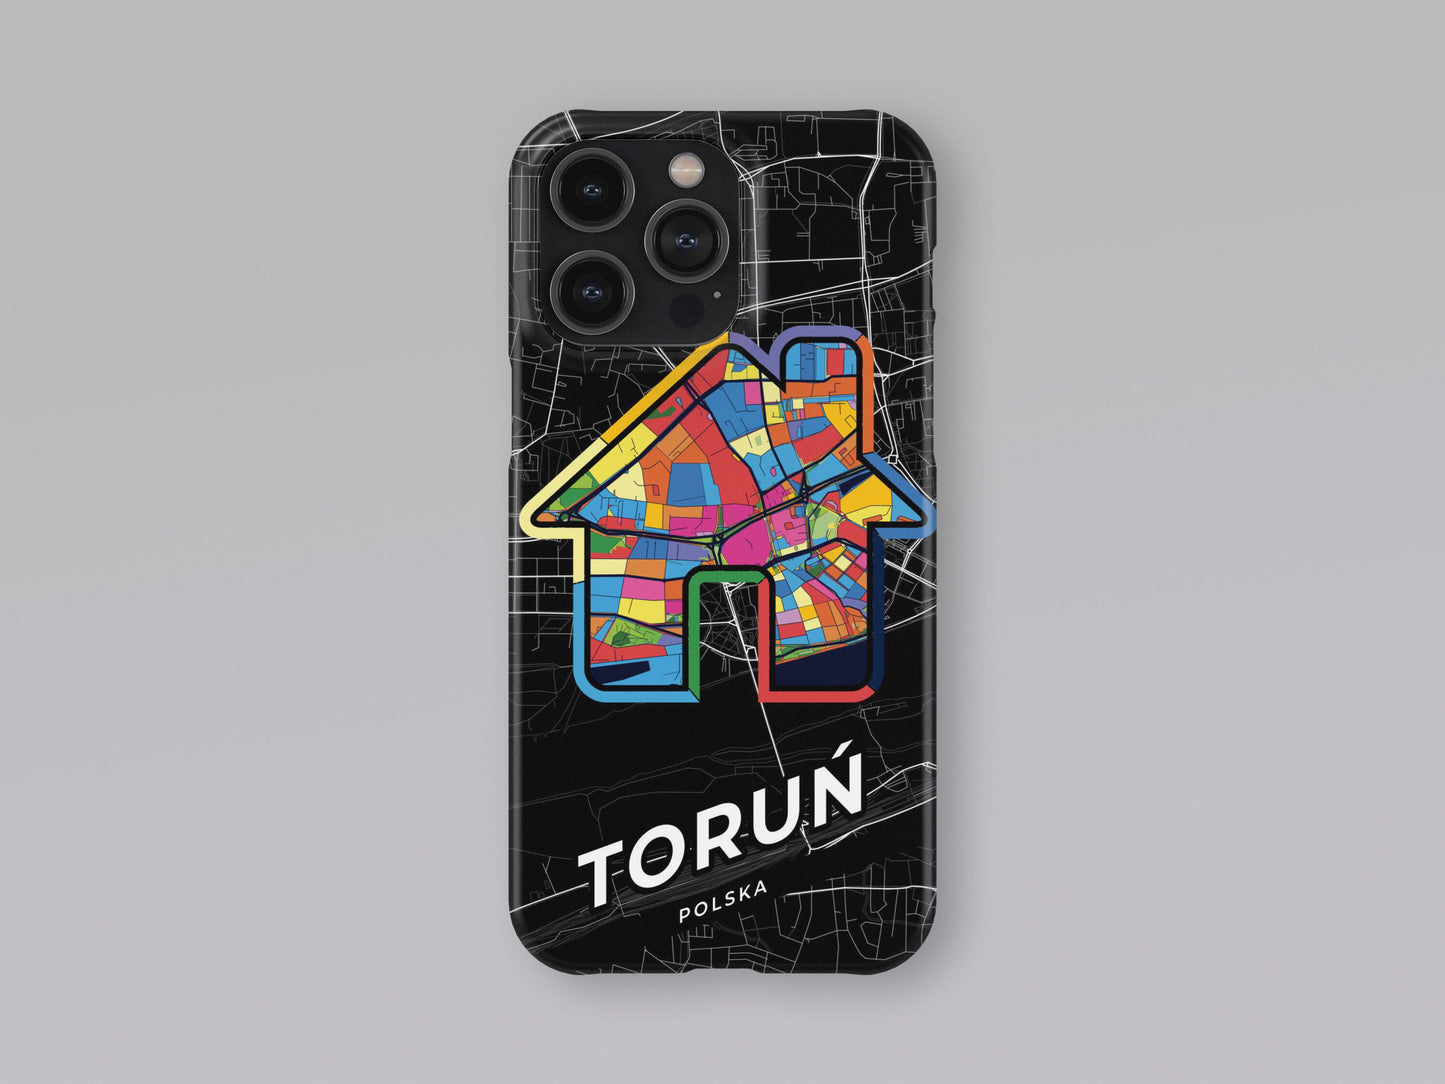 Toruń Poland slim phone case with colorful icon 3